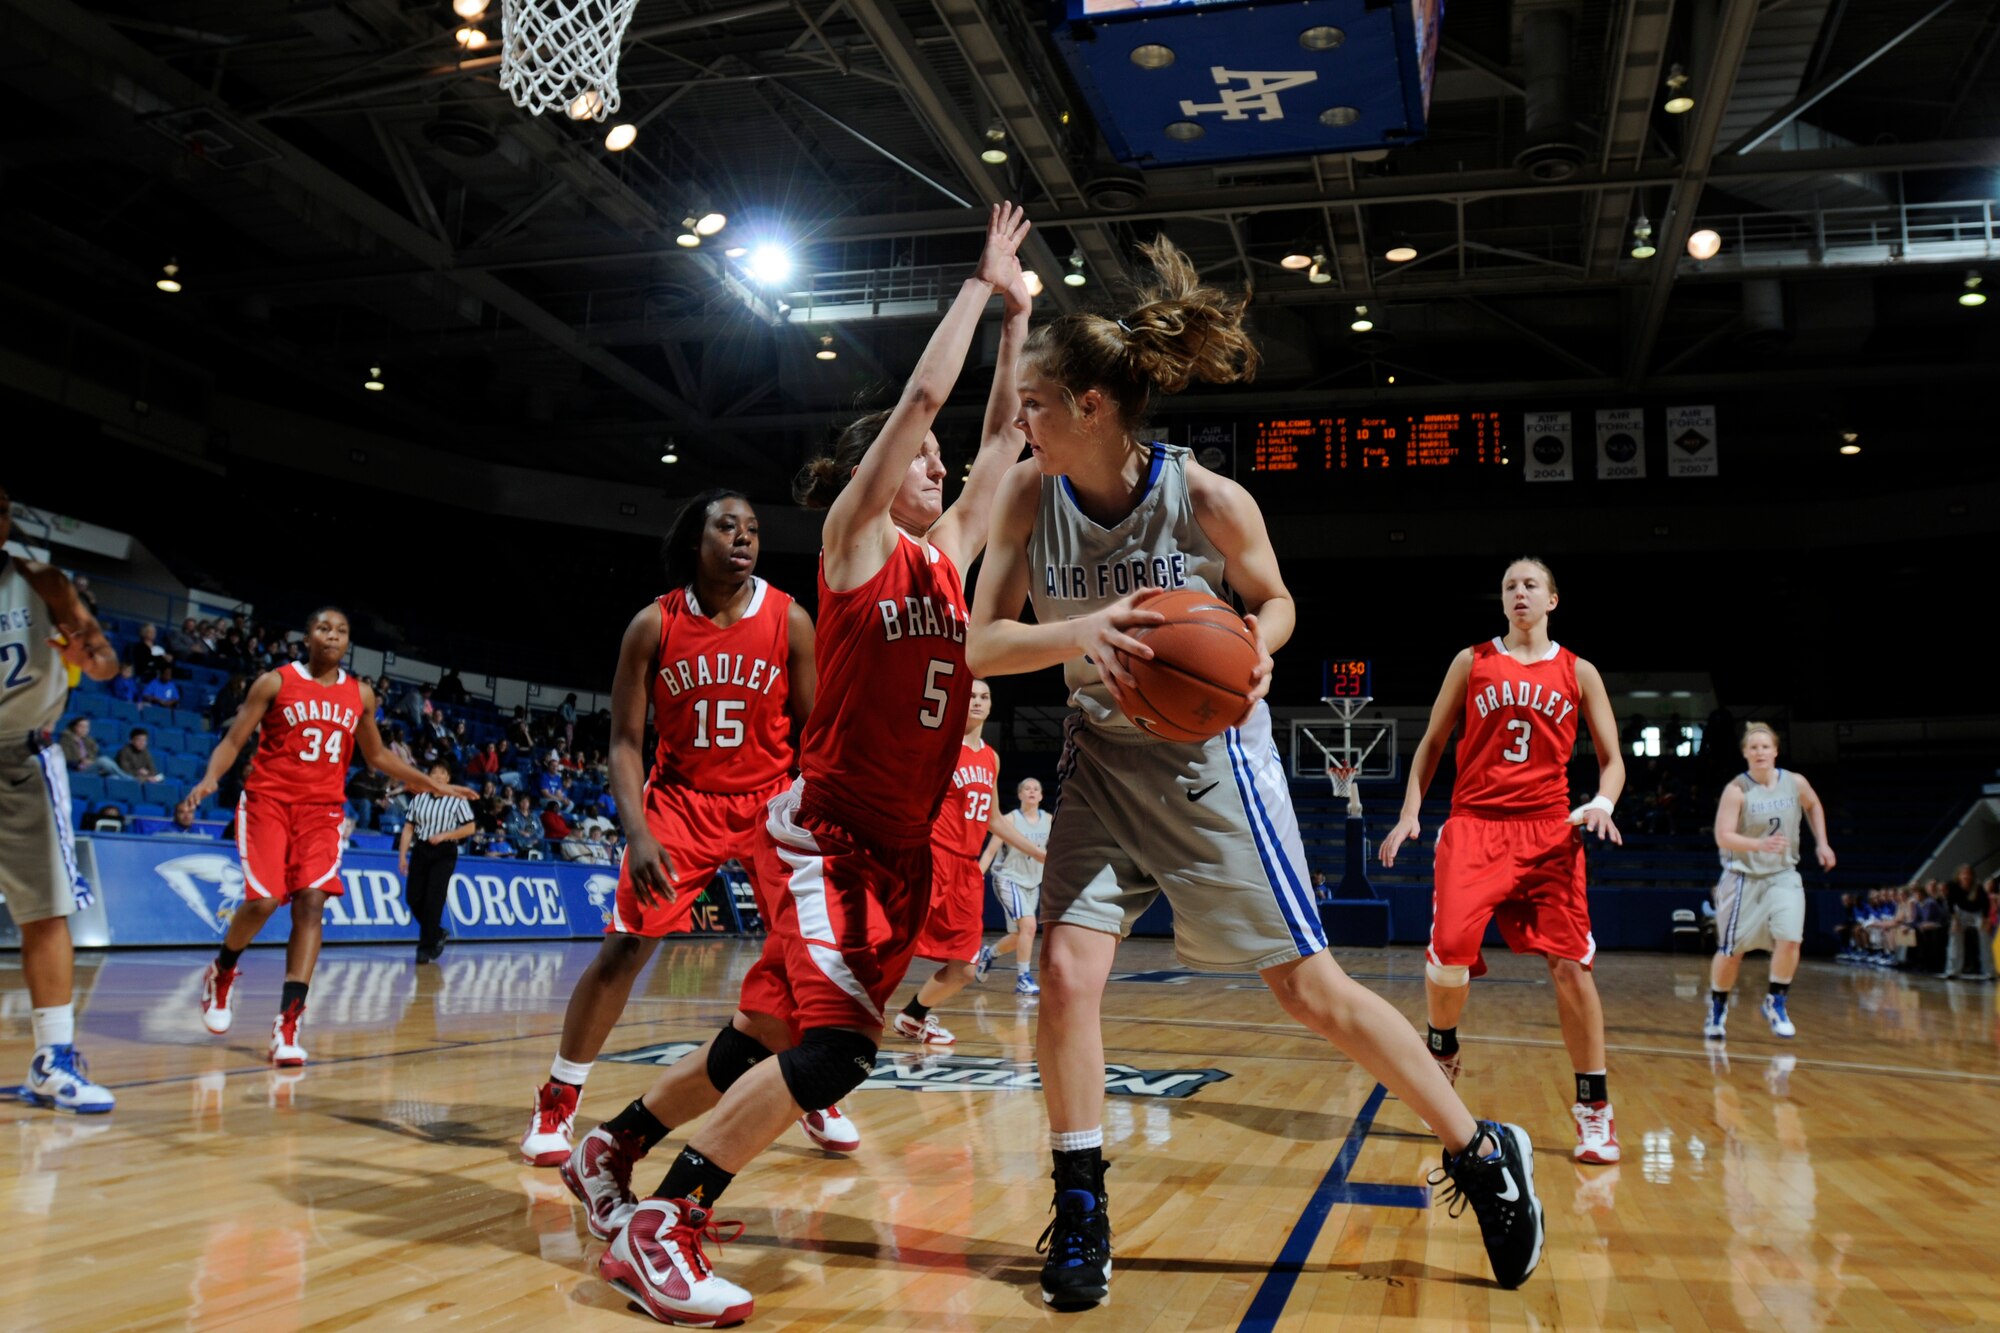 Falcons freshman forward Katie Hilbig pushes toward the basket as the Braves' Hanna Muegge defends during the Air Force-Bradley game at the Air Force Academy's Clune Arena Dec. 19, 2009. Hilbig, a native of Castle Rock, Colo., had two rebounds in the Falcons' 62-45 loss. (U.S. Air Force photo/J. Rachel Spencer)